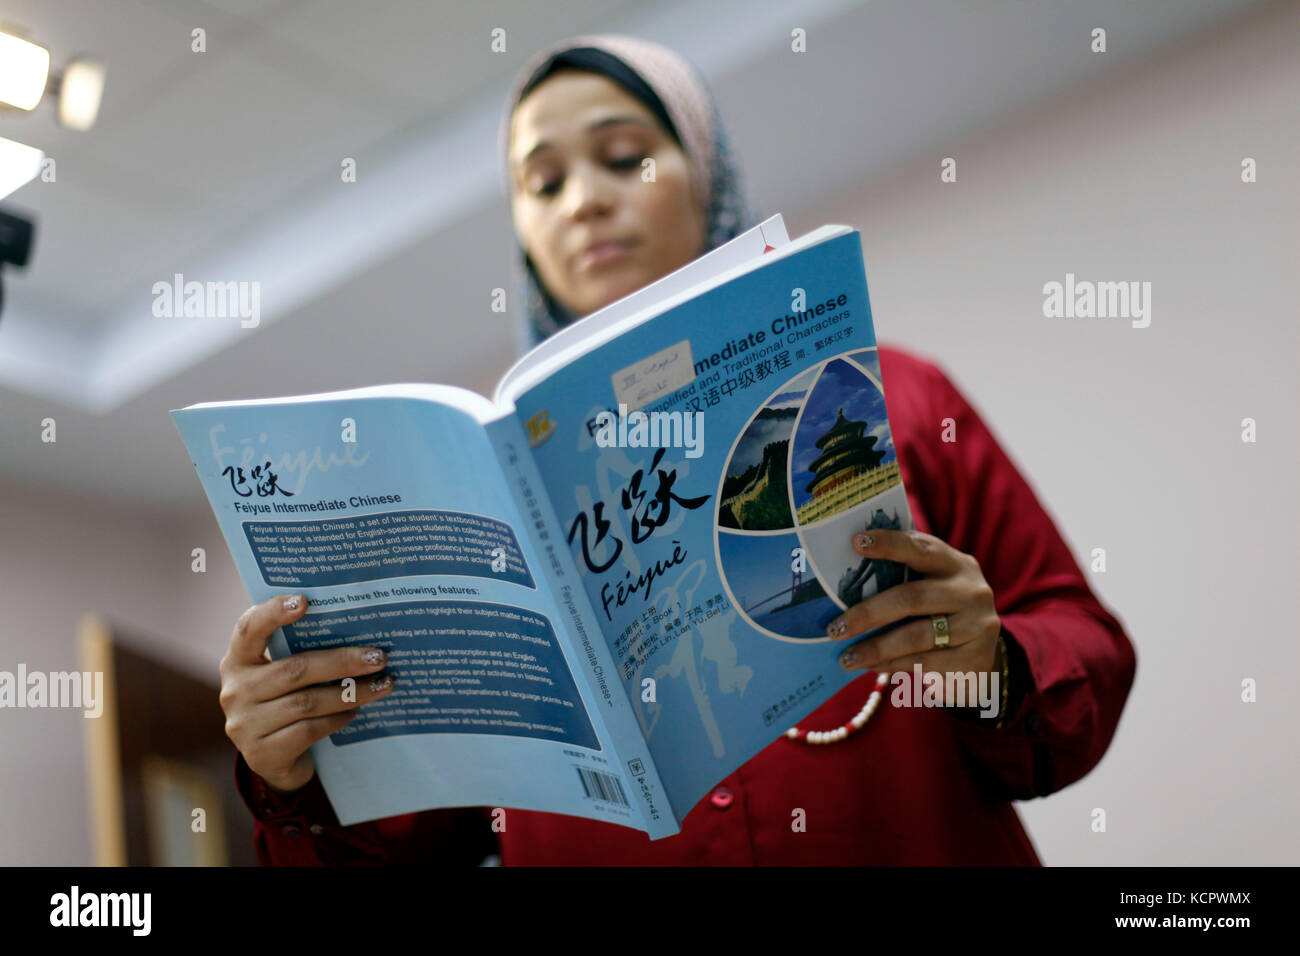 (171006) -- CAIRO, Oct. 6, 2017 (Xinhua) -- Rasha Kamal reads a Chinese textbook in her office at the Ain Shams University in Cairo, Egypt, on Sept. 28, 2017. Recommended by their brother Abdullah Kamal, a famous Egyptian journalist who foresaw the rise of China as a global power, twin sisters Rasha and Shiamaa Kamal decided to study the Chinese language in the 1990s only for better understanding the mighty economic force. Now, they have become the building blocks of a bridge that connects the cultures of China and the Arab world, working as established translators and lecturers in the Chinese Stock Photo